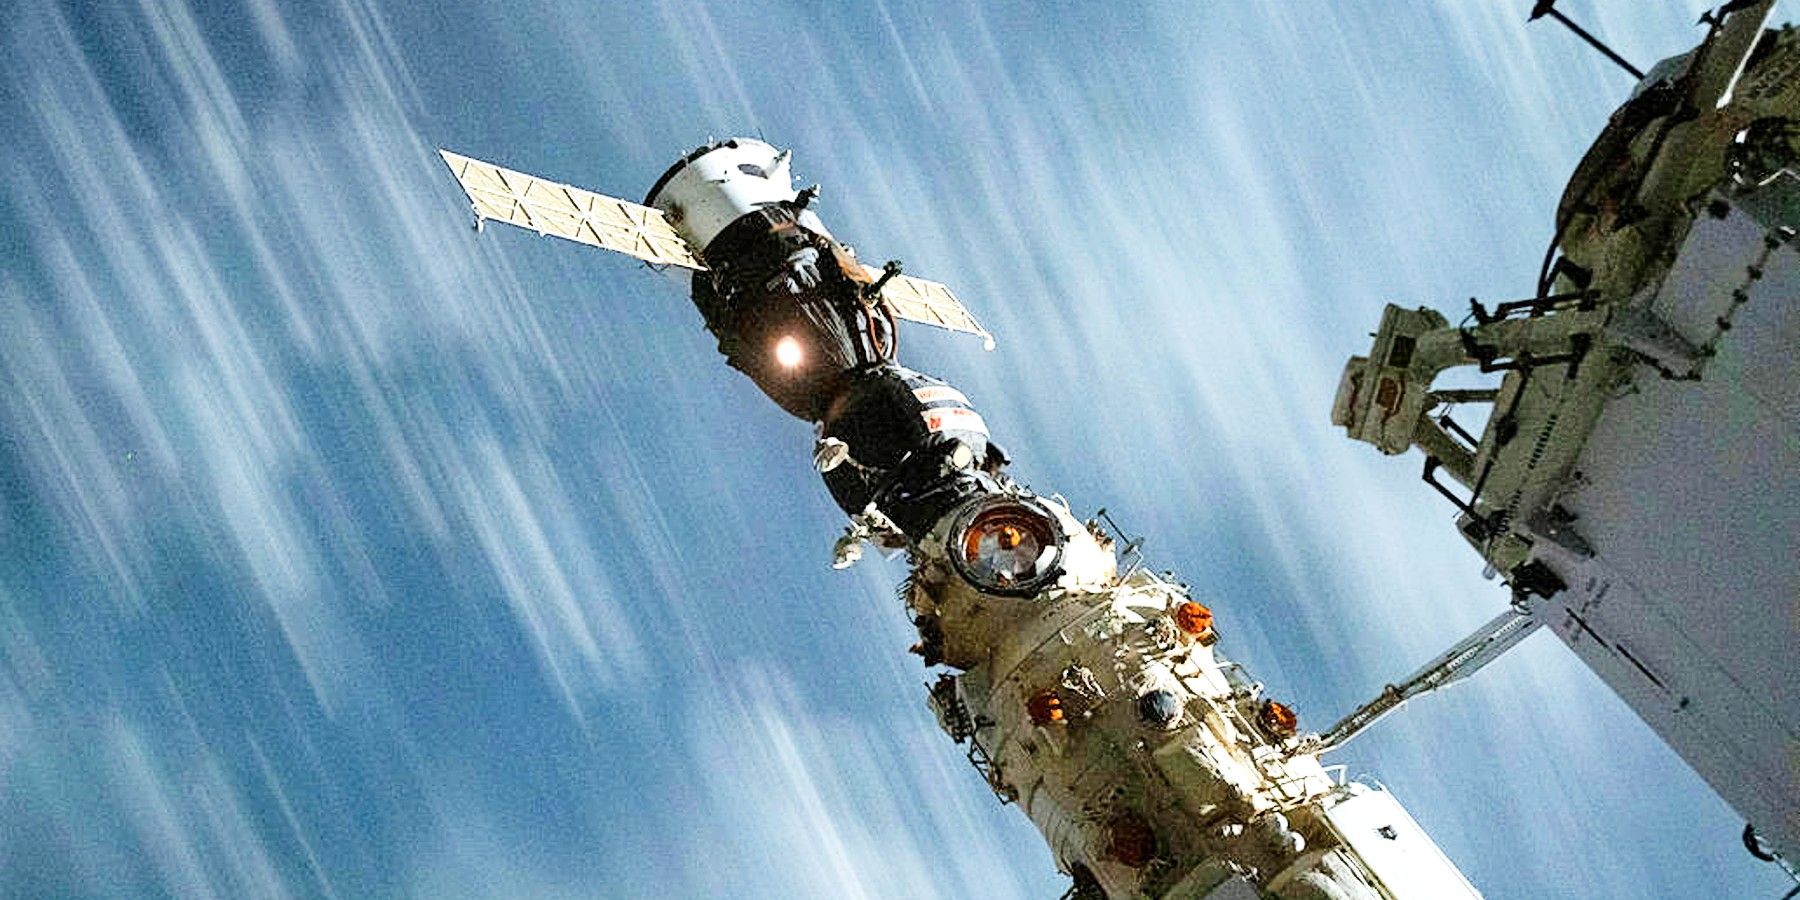 This Incredible Photo Of The ISS Shows The Spacecraft In All Of Its Beauty